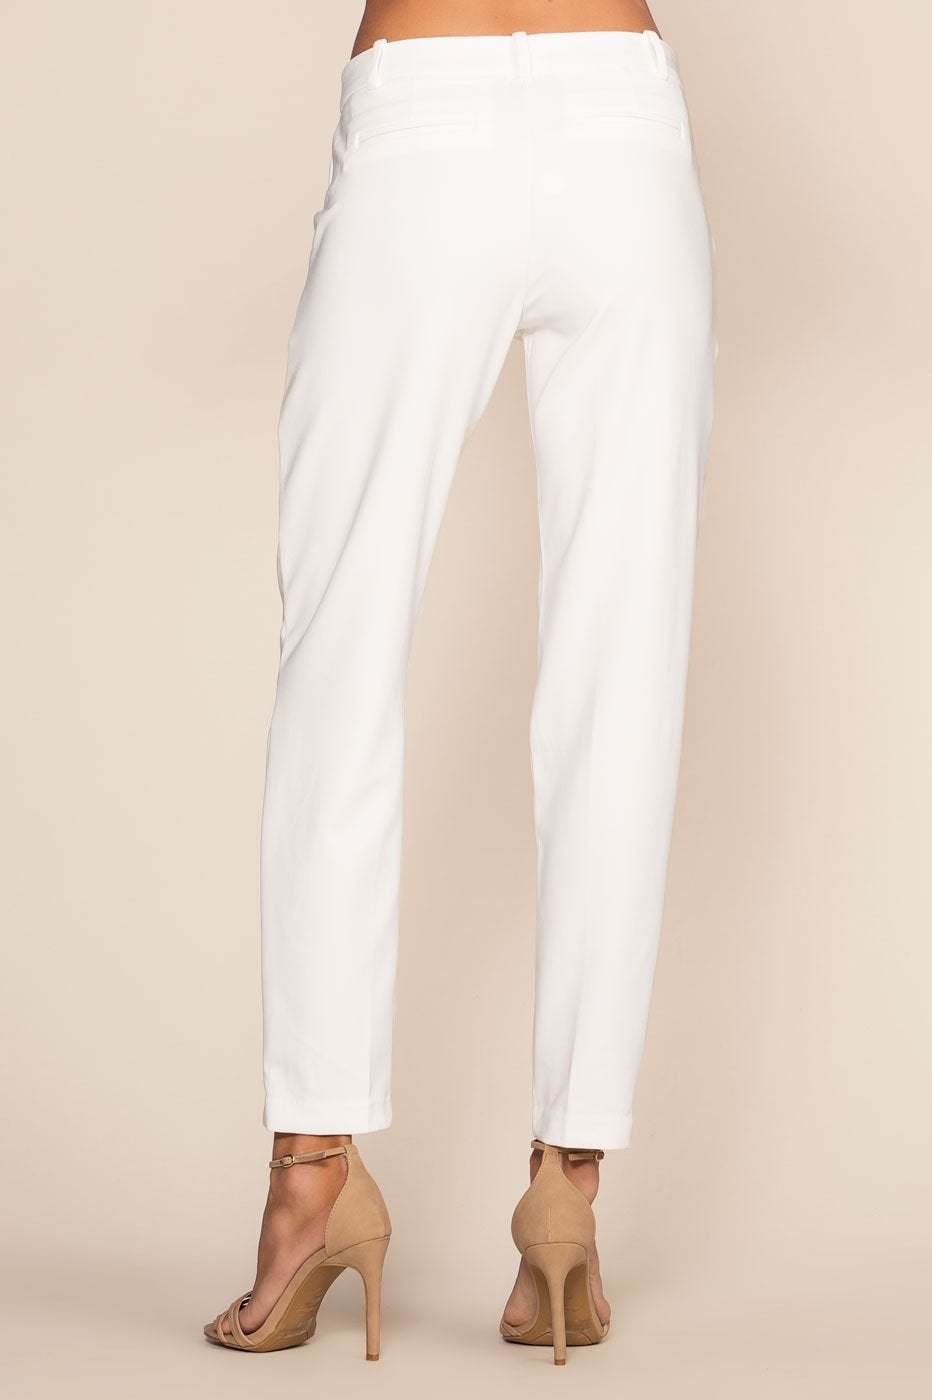 Pants - Now Or Never Pants - White